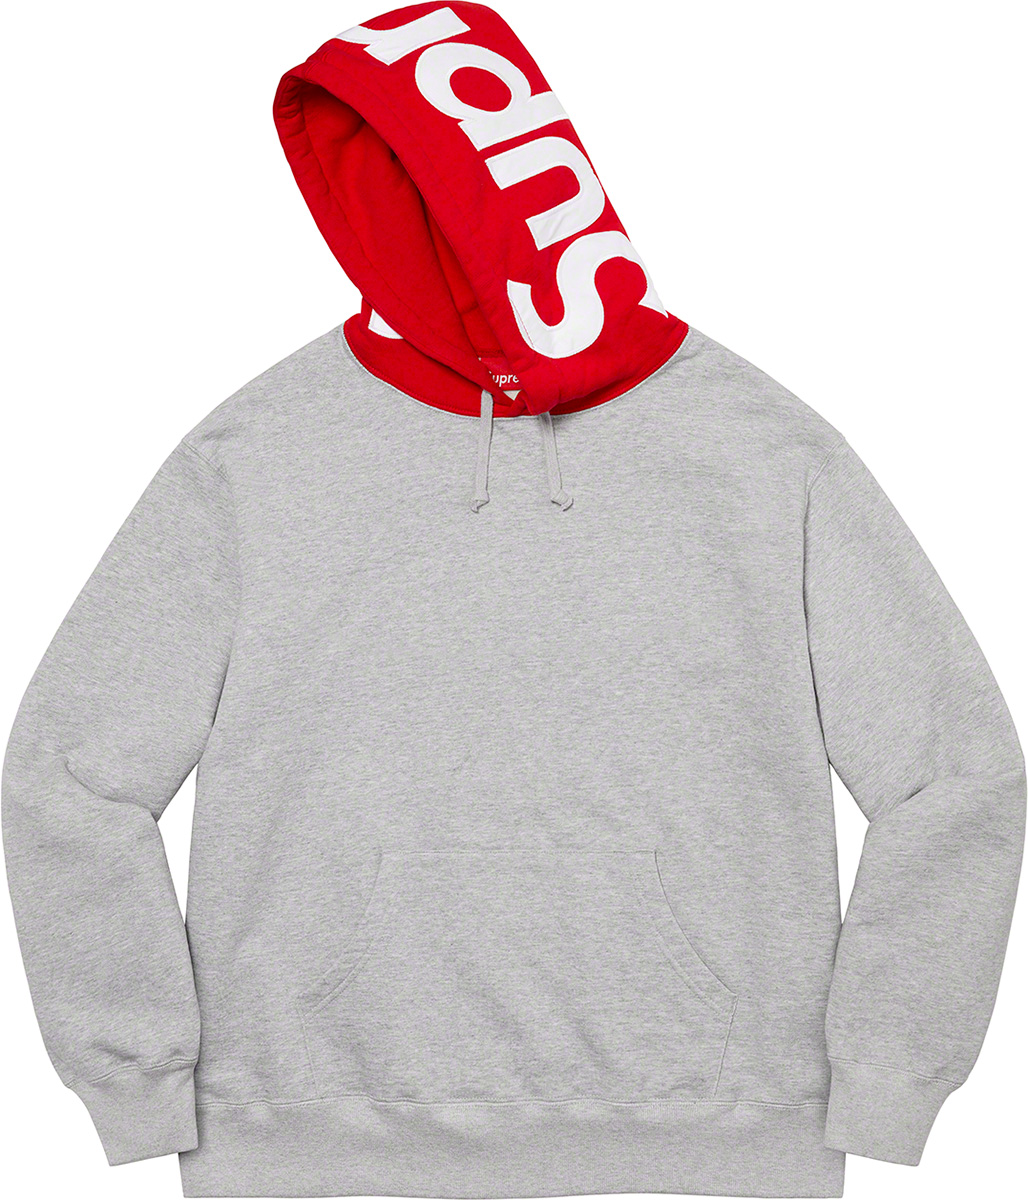 Supreme Contrast Zip Up Hooded パーカー グレーL-